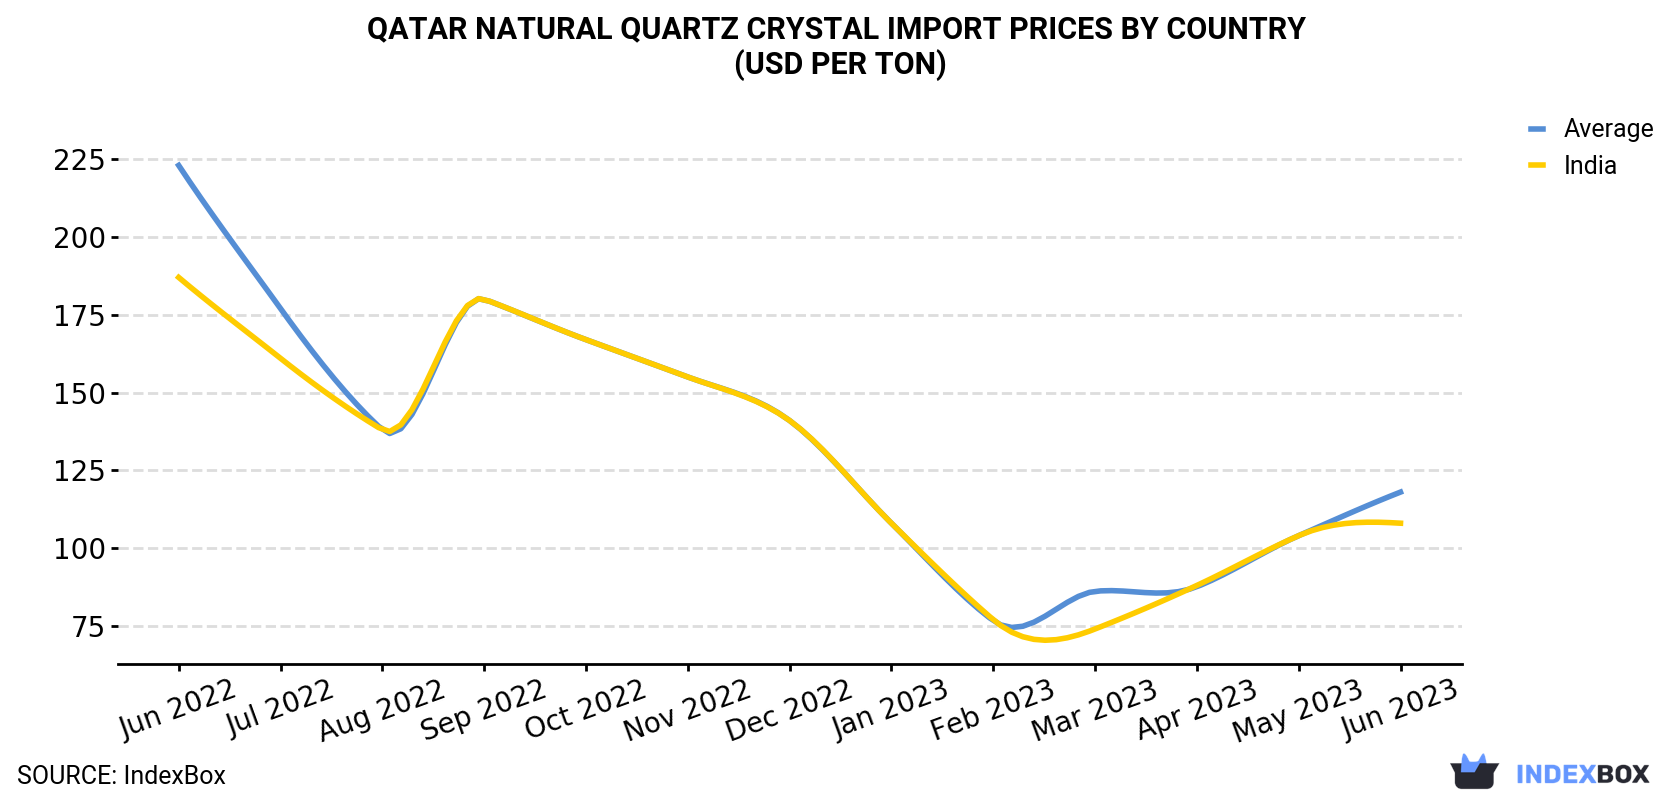 Qatar Natural Quartz Crystal Import Prices By Country (USD Per Ton)